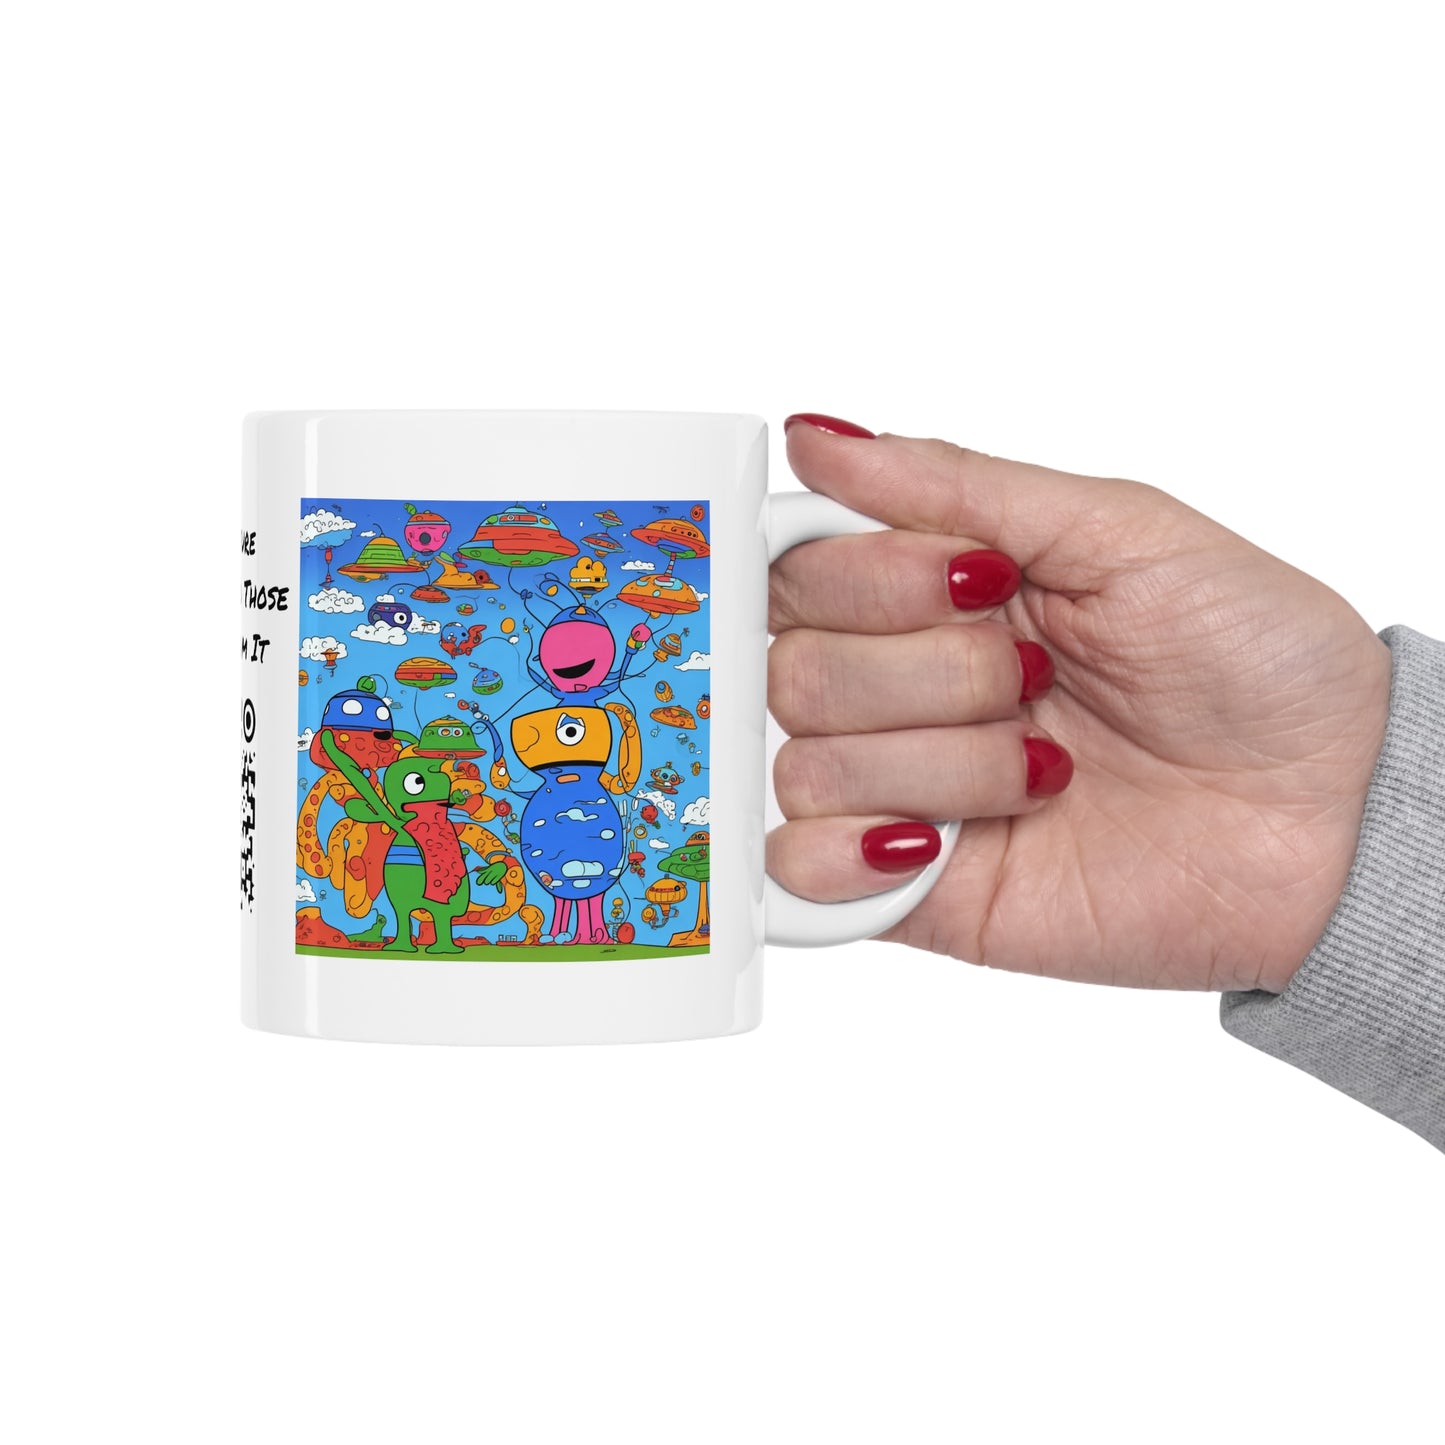 Abstraction | Abstract | Art | Colorful | Trendy | Graphic | Funny | UFO | Aliens | Coffe | Tea | Hot Chocolate | Ceramic Mug |11oz